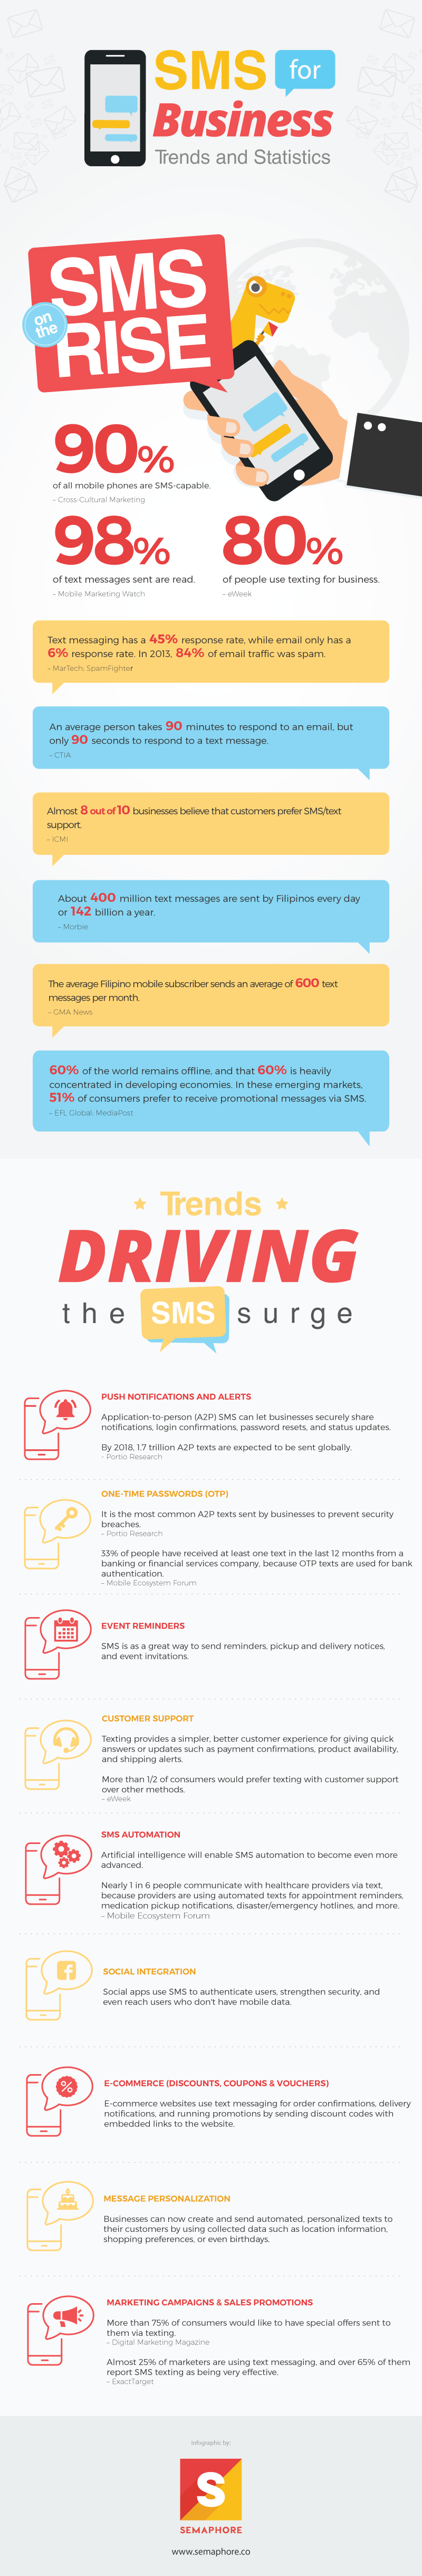 SMS for Business: Trends and Statistics